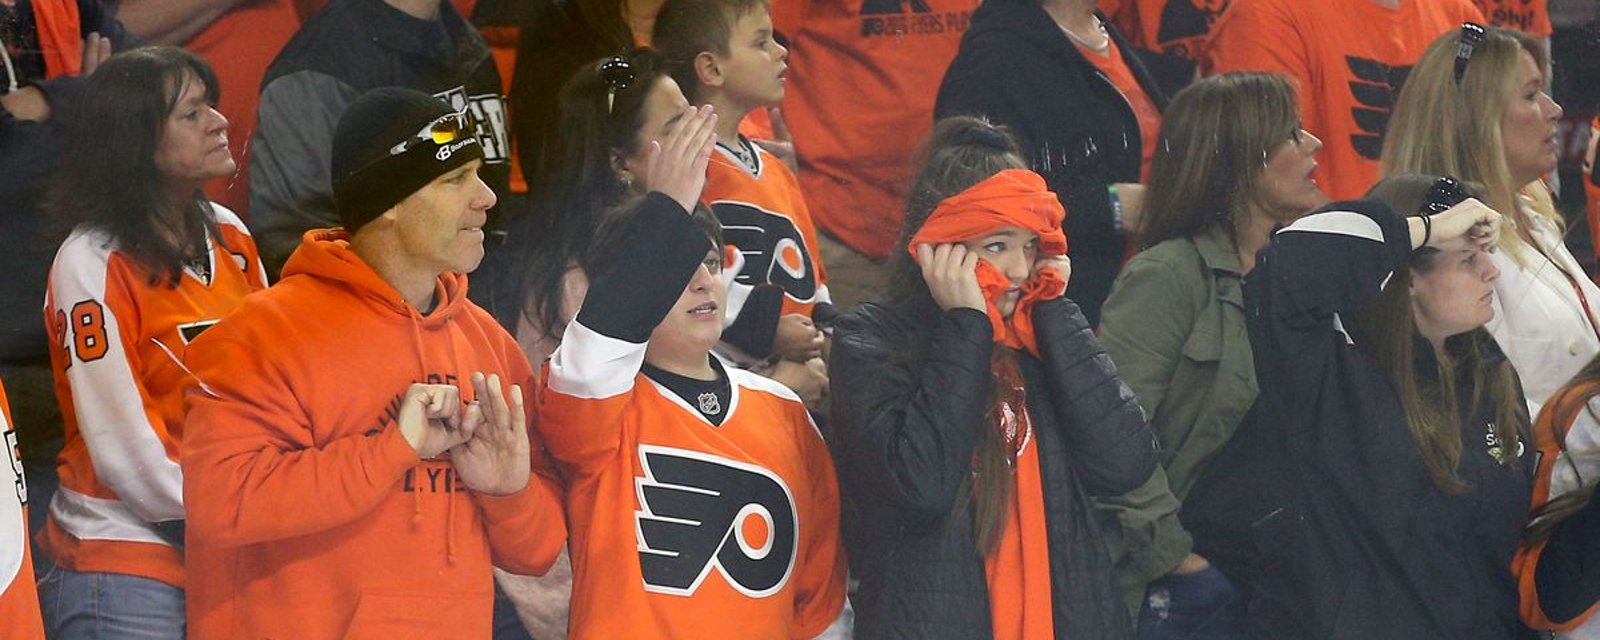 Flyers booed off the ice by their fans in humiliating first period against the Devils